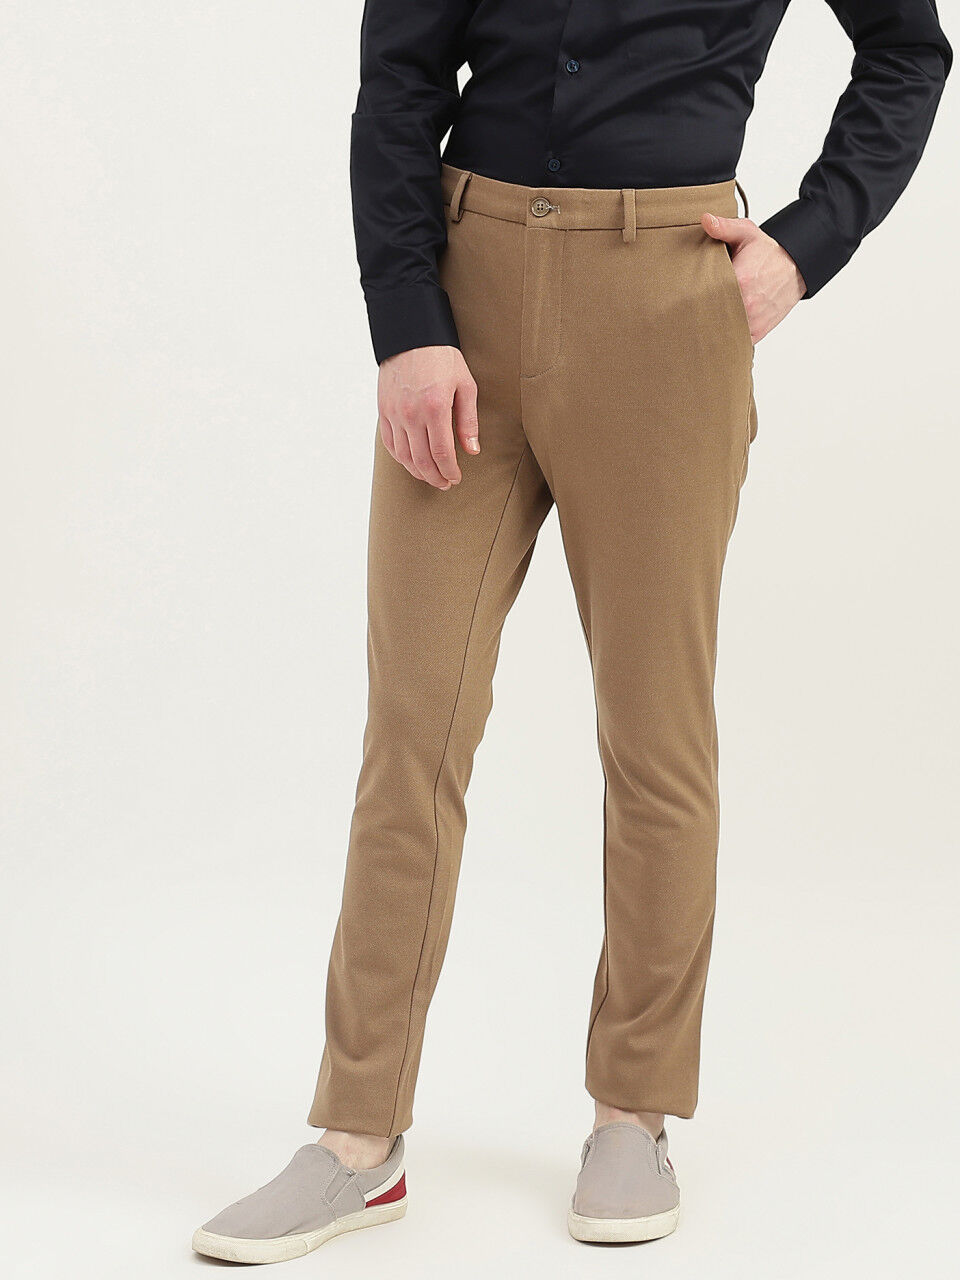 Black Navy Cotton s Formal Trousers